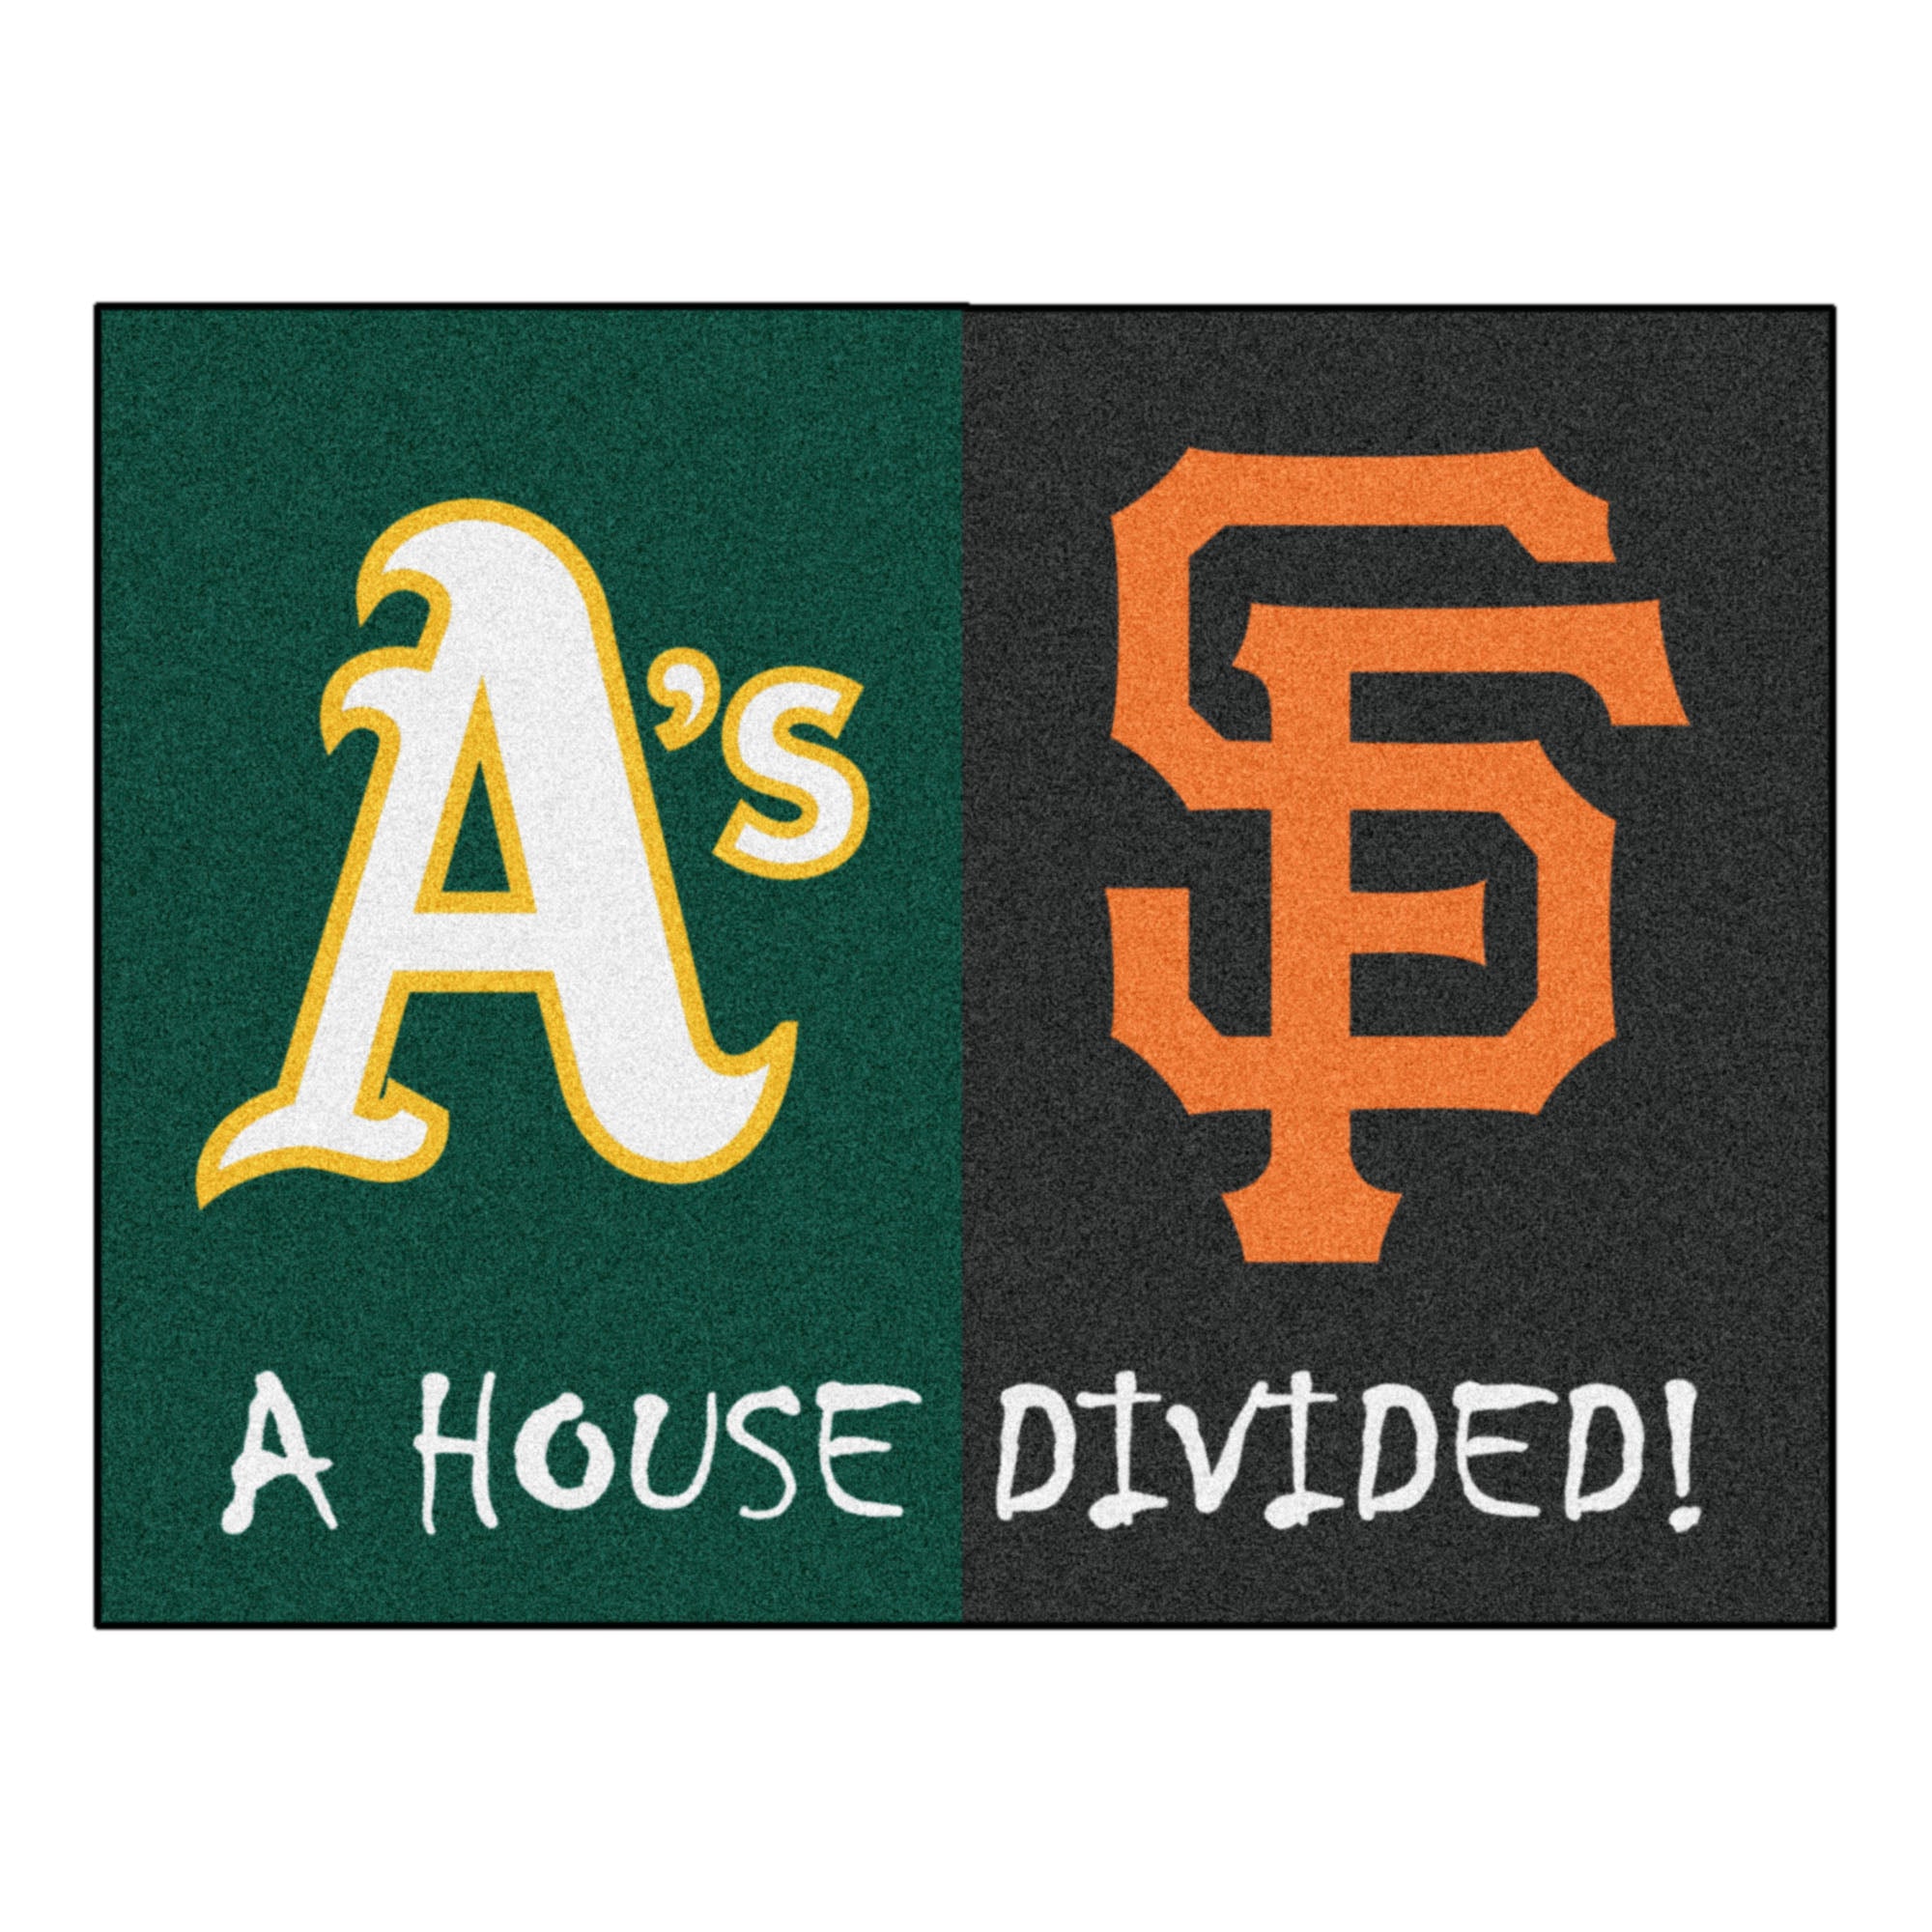 Fanmat - Mlb house divided - athletics / giants house divided mat